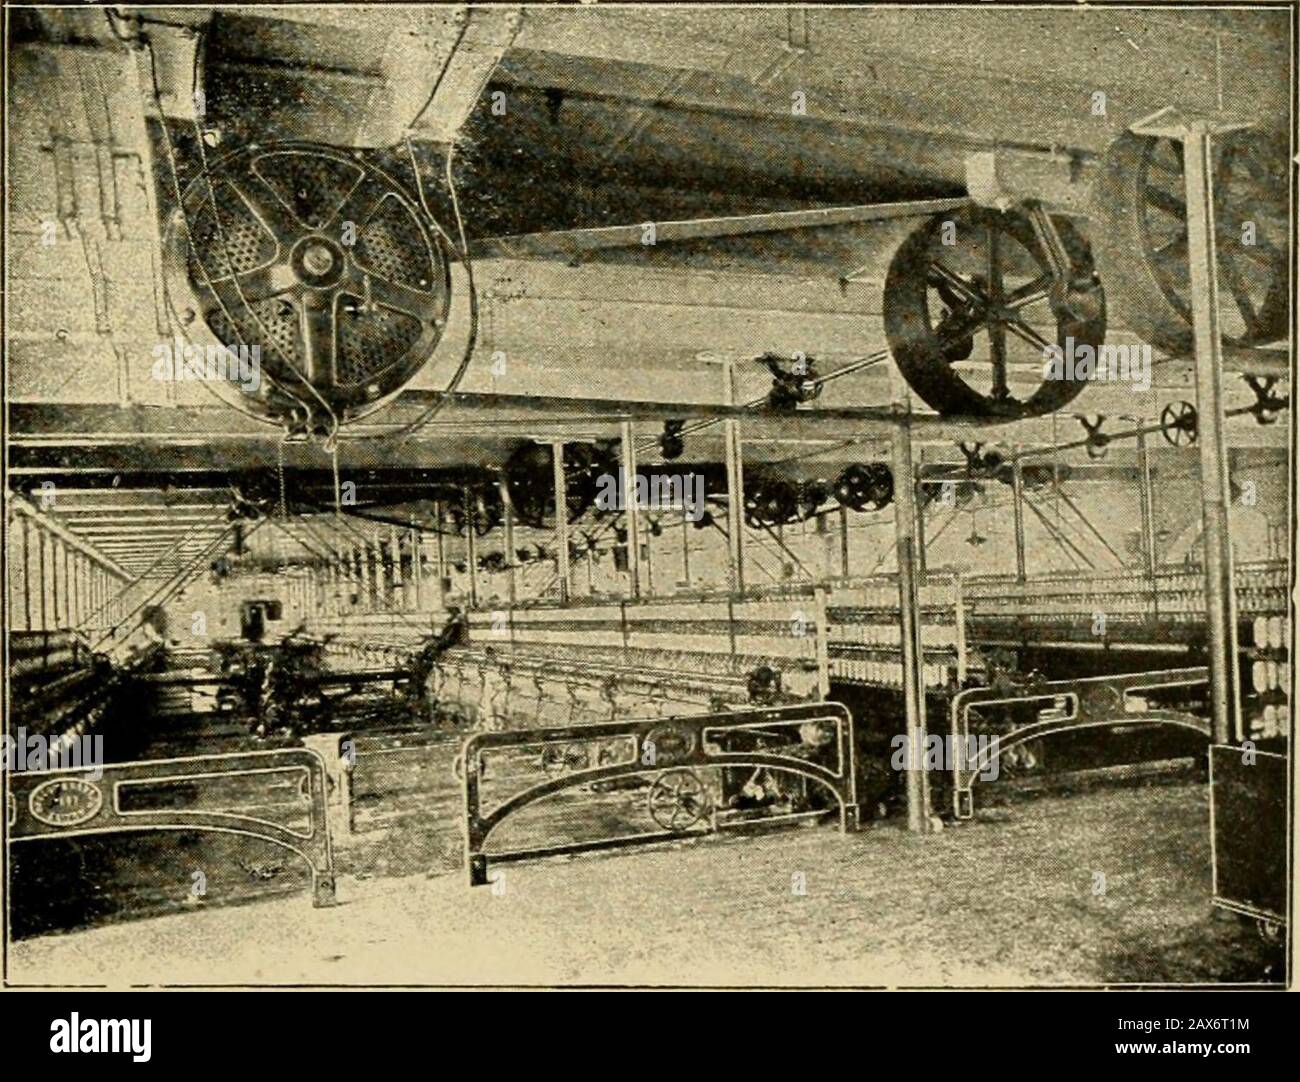 Useful information for cotton manufacturers . A view across a spinning room, showing spinning frames drivenpairs by direct connected motors.. An electric driven mule spinning 1069 Atlanta, Ga., STUART W. CRAMER, Charlotte, N, C. Cotton Manufacturings Continued. Stock Photo